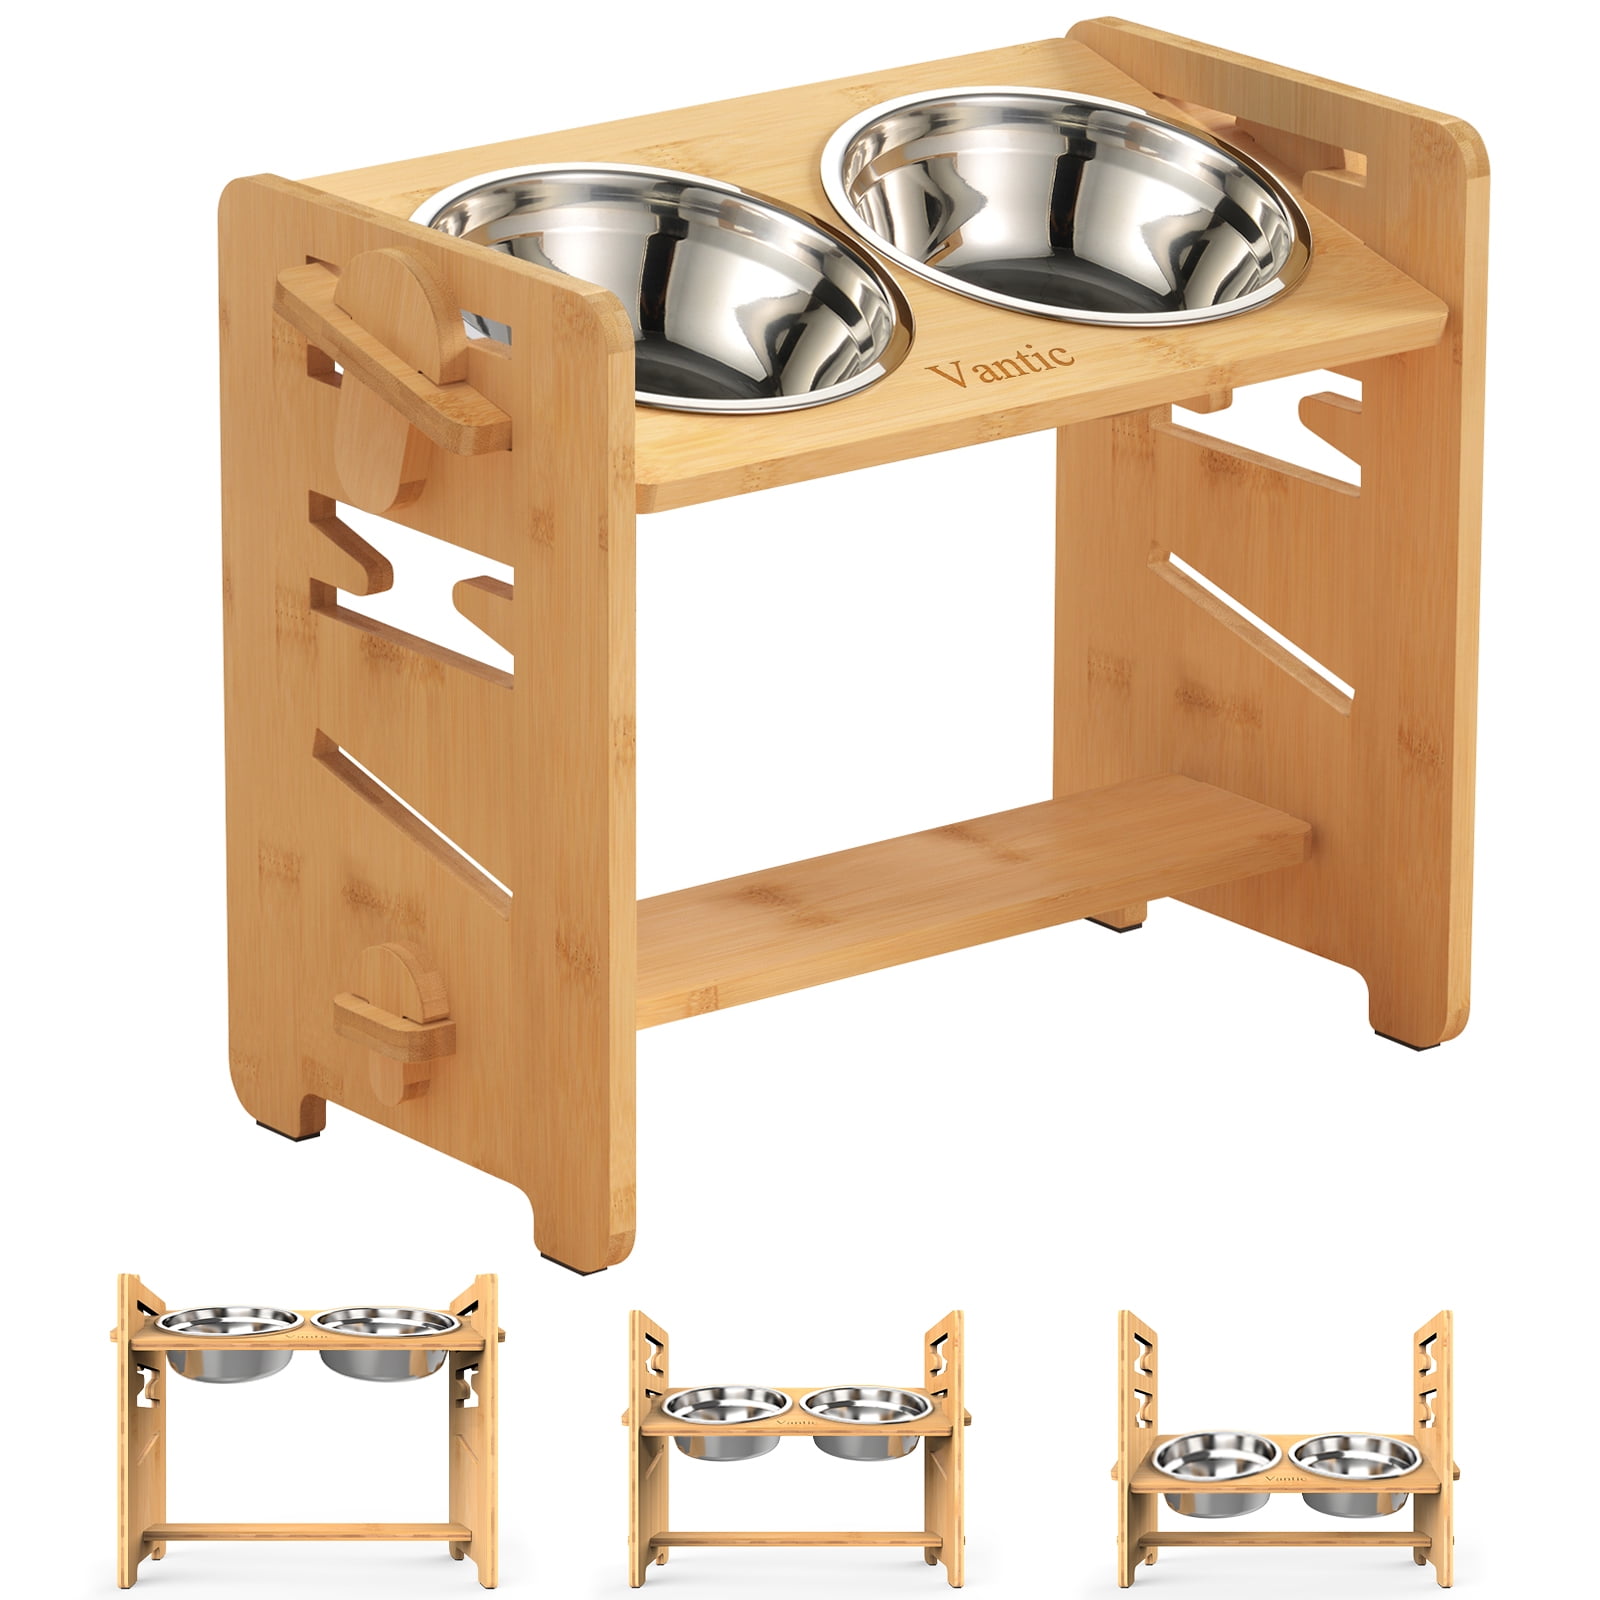 LeonardCreek Elevated Dog Bowls with 2 Stainless Steel Bowls - Adjustable  Feeding Station for Small, Medium and Large Dogs - Promotes Better  Digestion